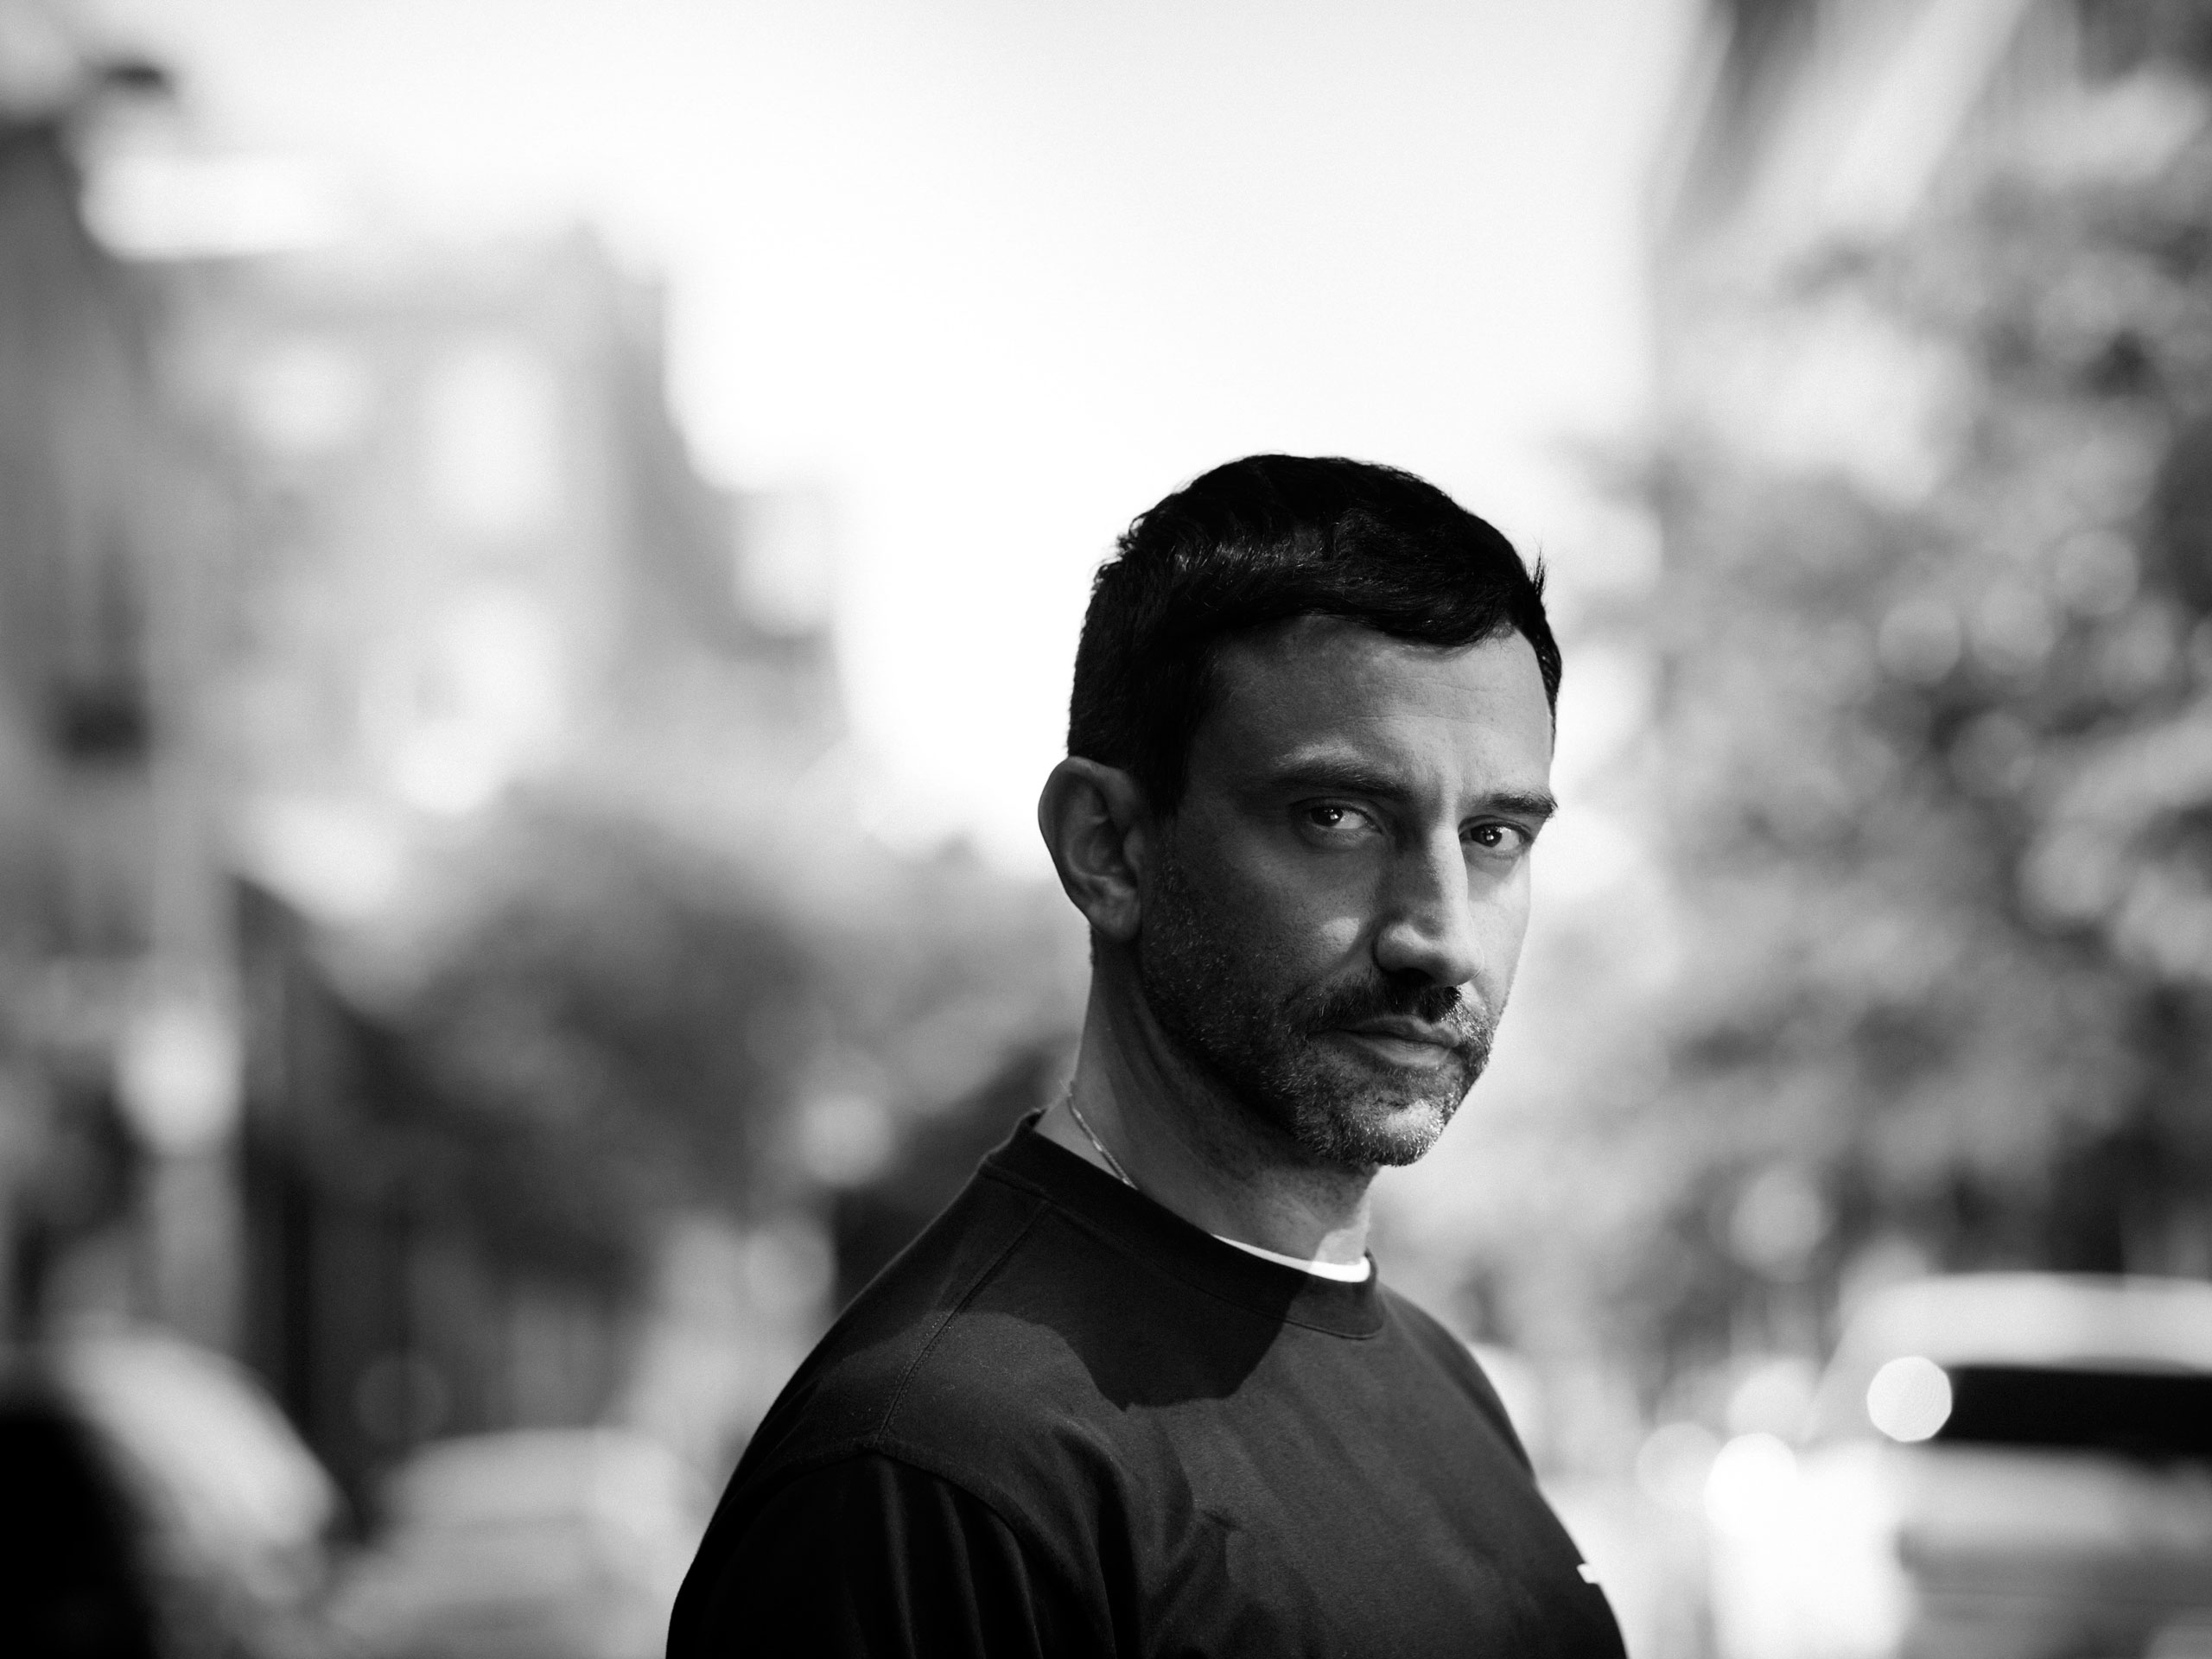 Riccardo Tisci, the Givenchy creative director, in New York City on Sept. 14, 2015. (Chad Batka—The New York Times/Redux)